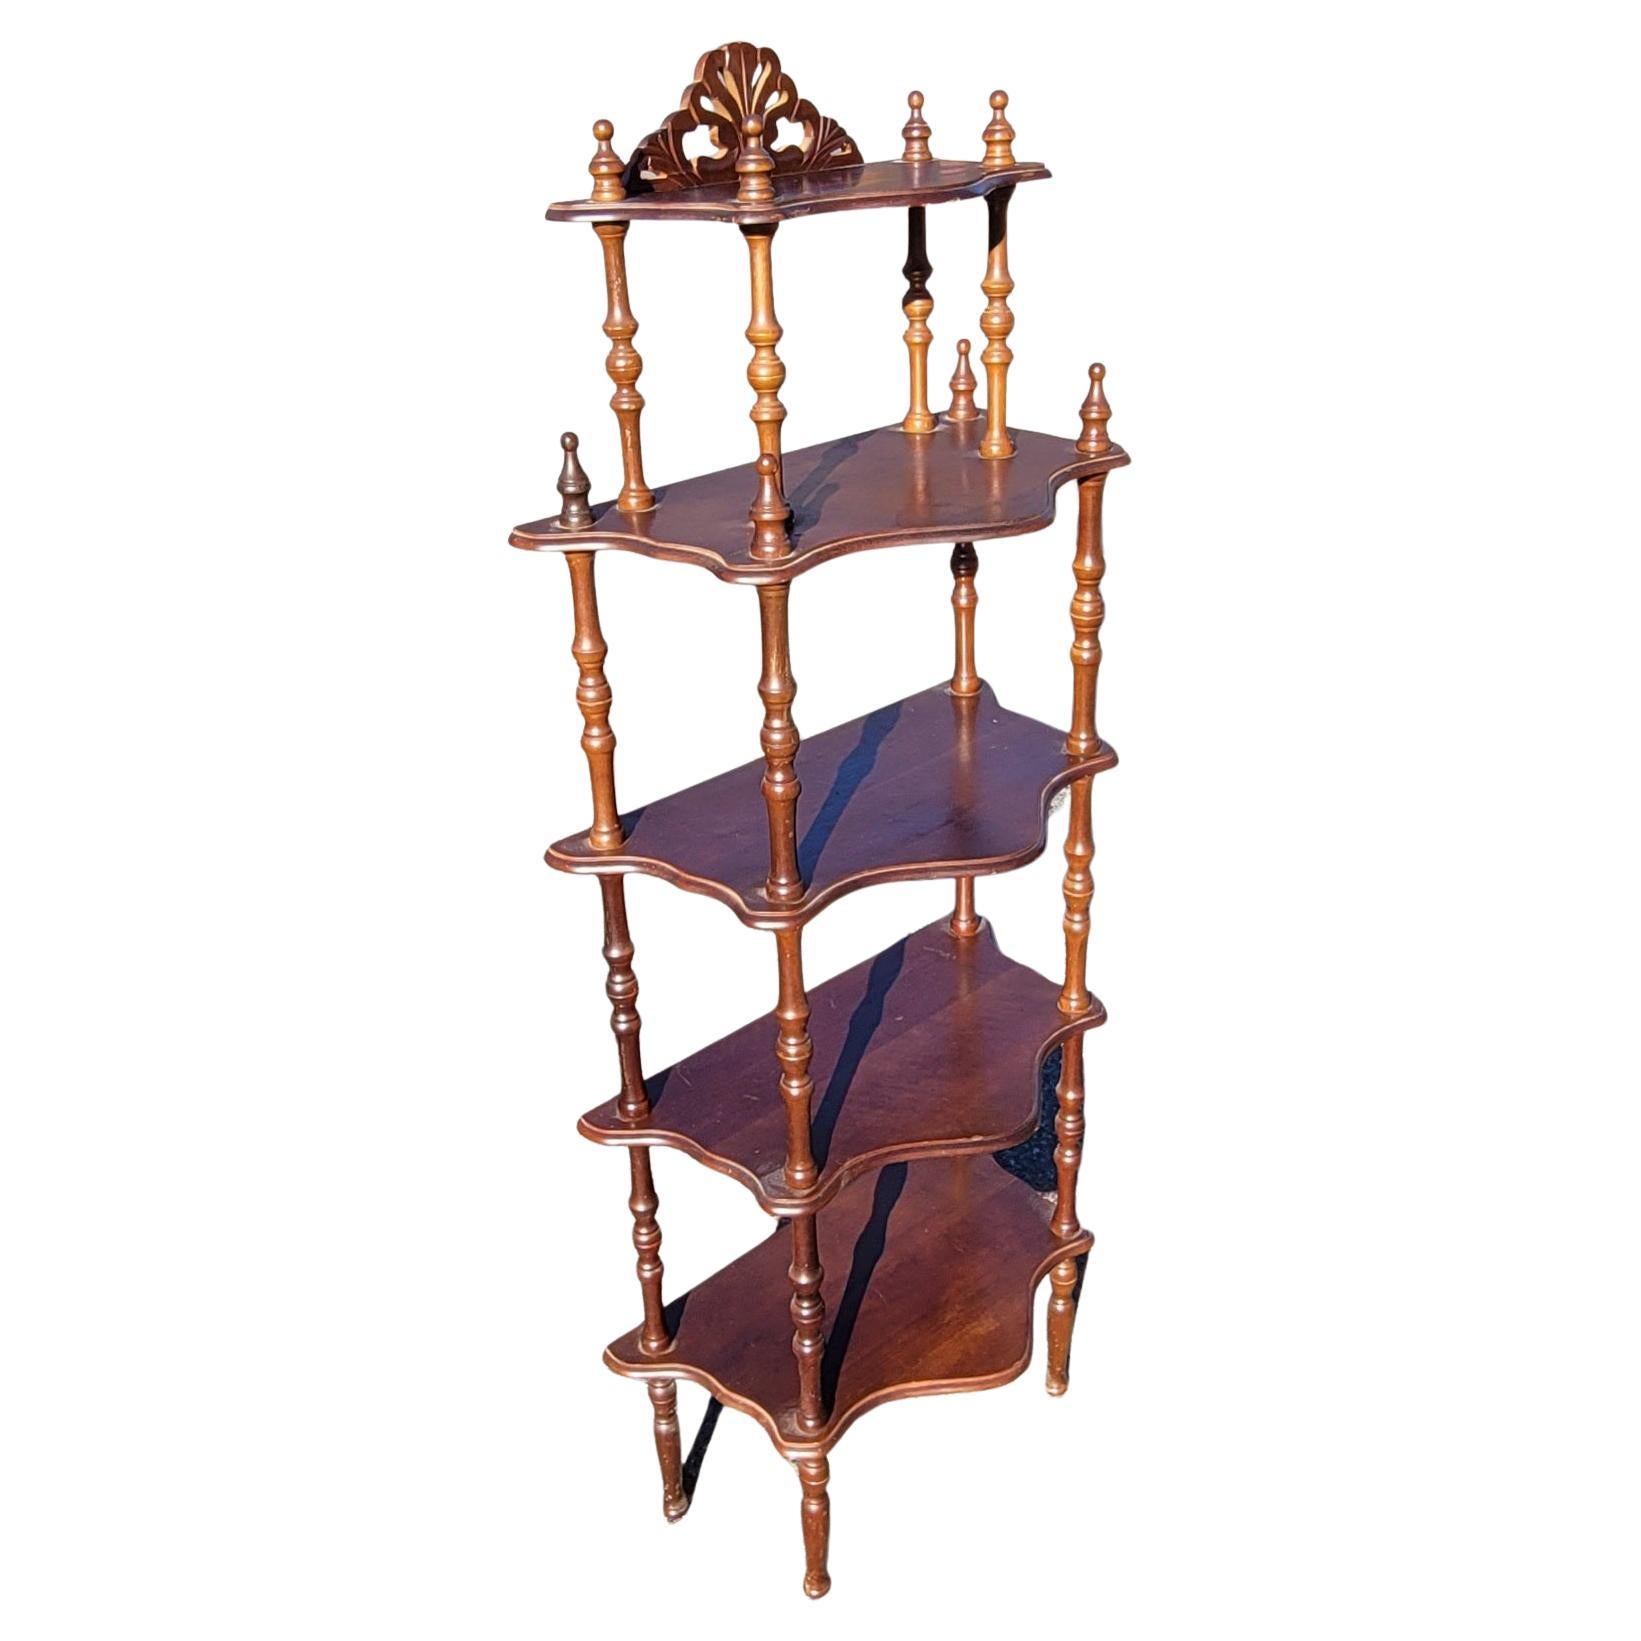 A patinated Antique English regency style mahogany narrow etagere in good condition. 
Great for displaying arts and other ornamental objects. Height is adjustable as top layer is removable.
Measures 53.50